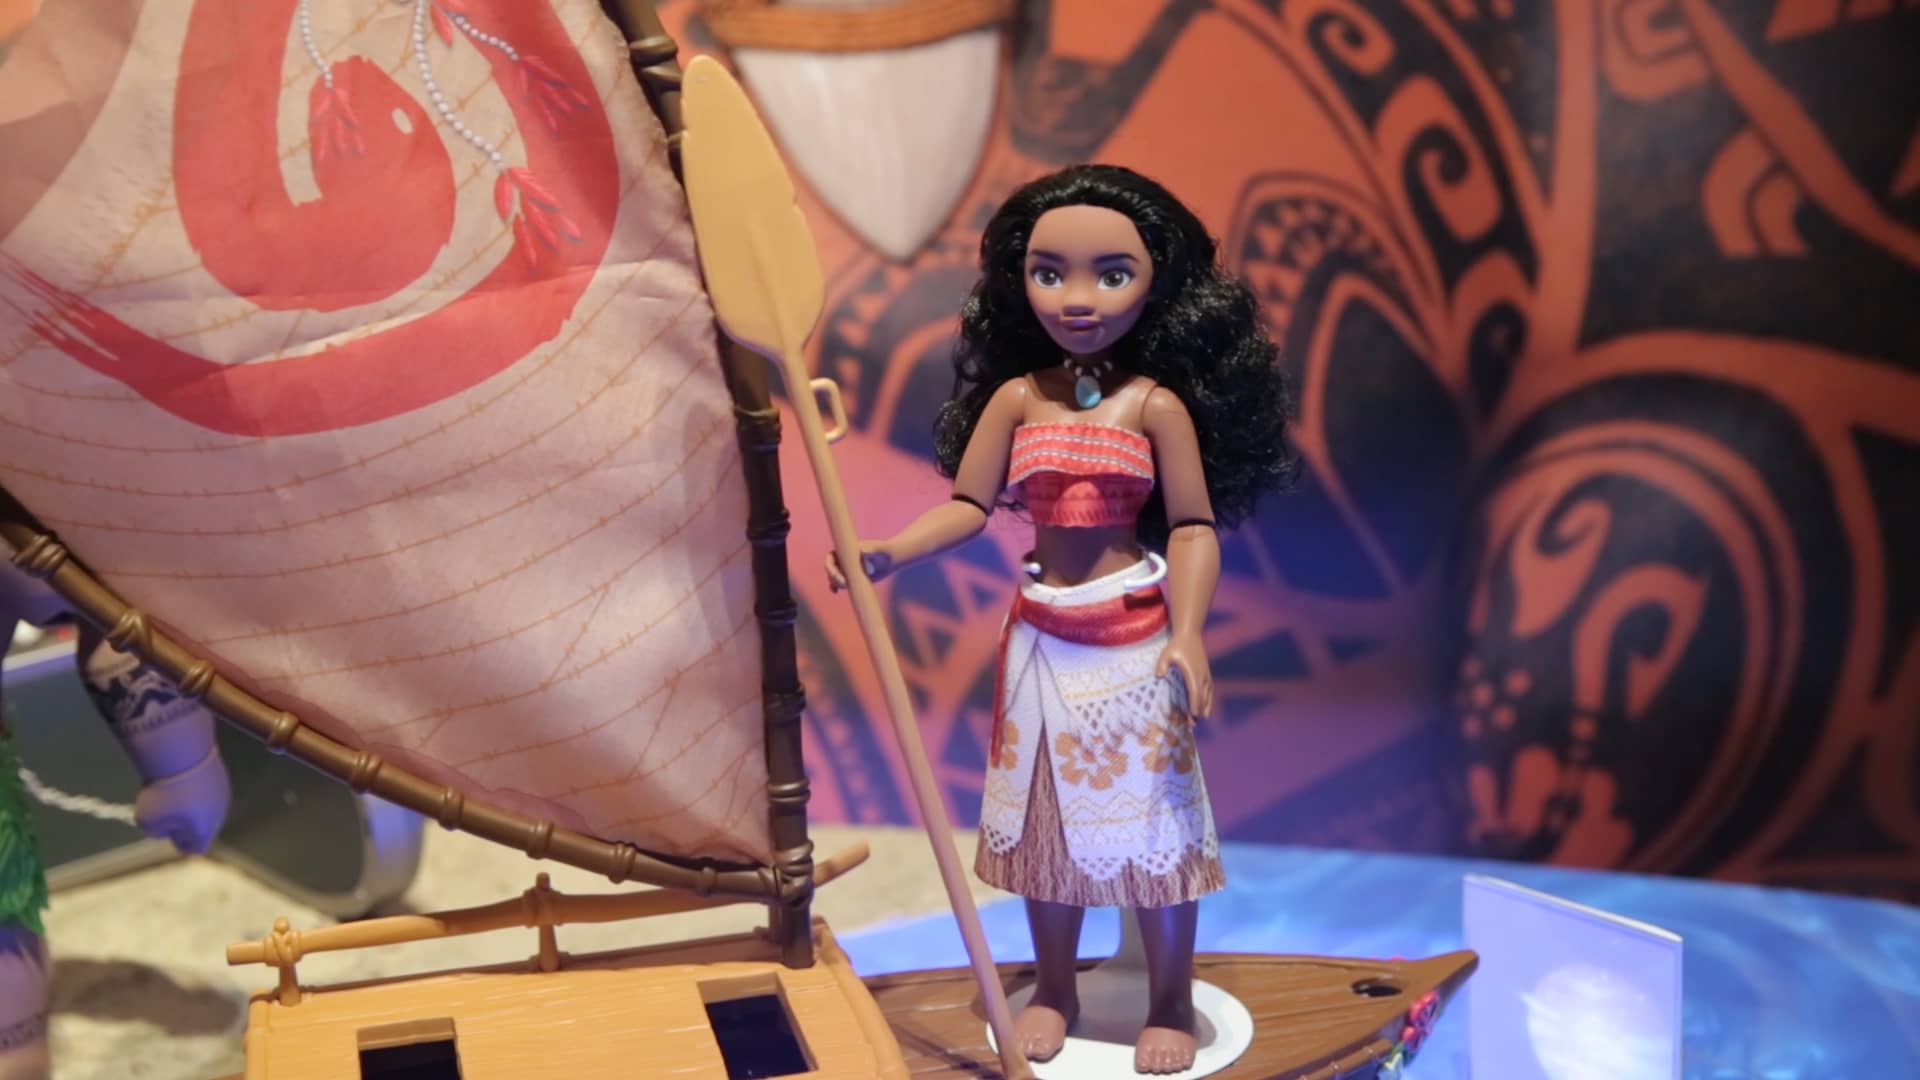 Moana' sails at the box office, but it could sink in the toy aisle